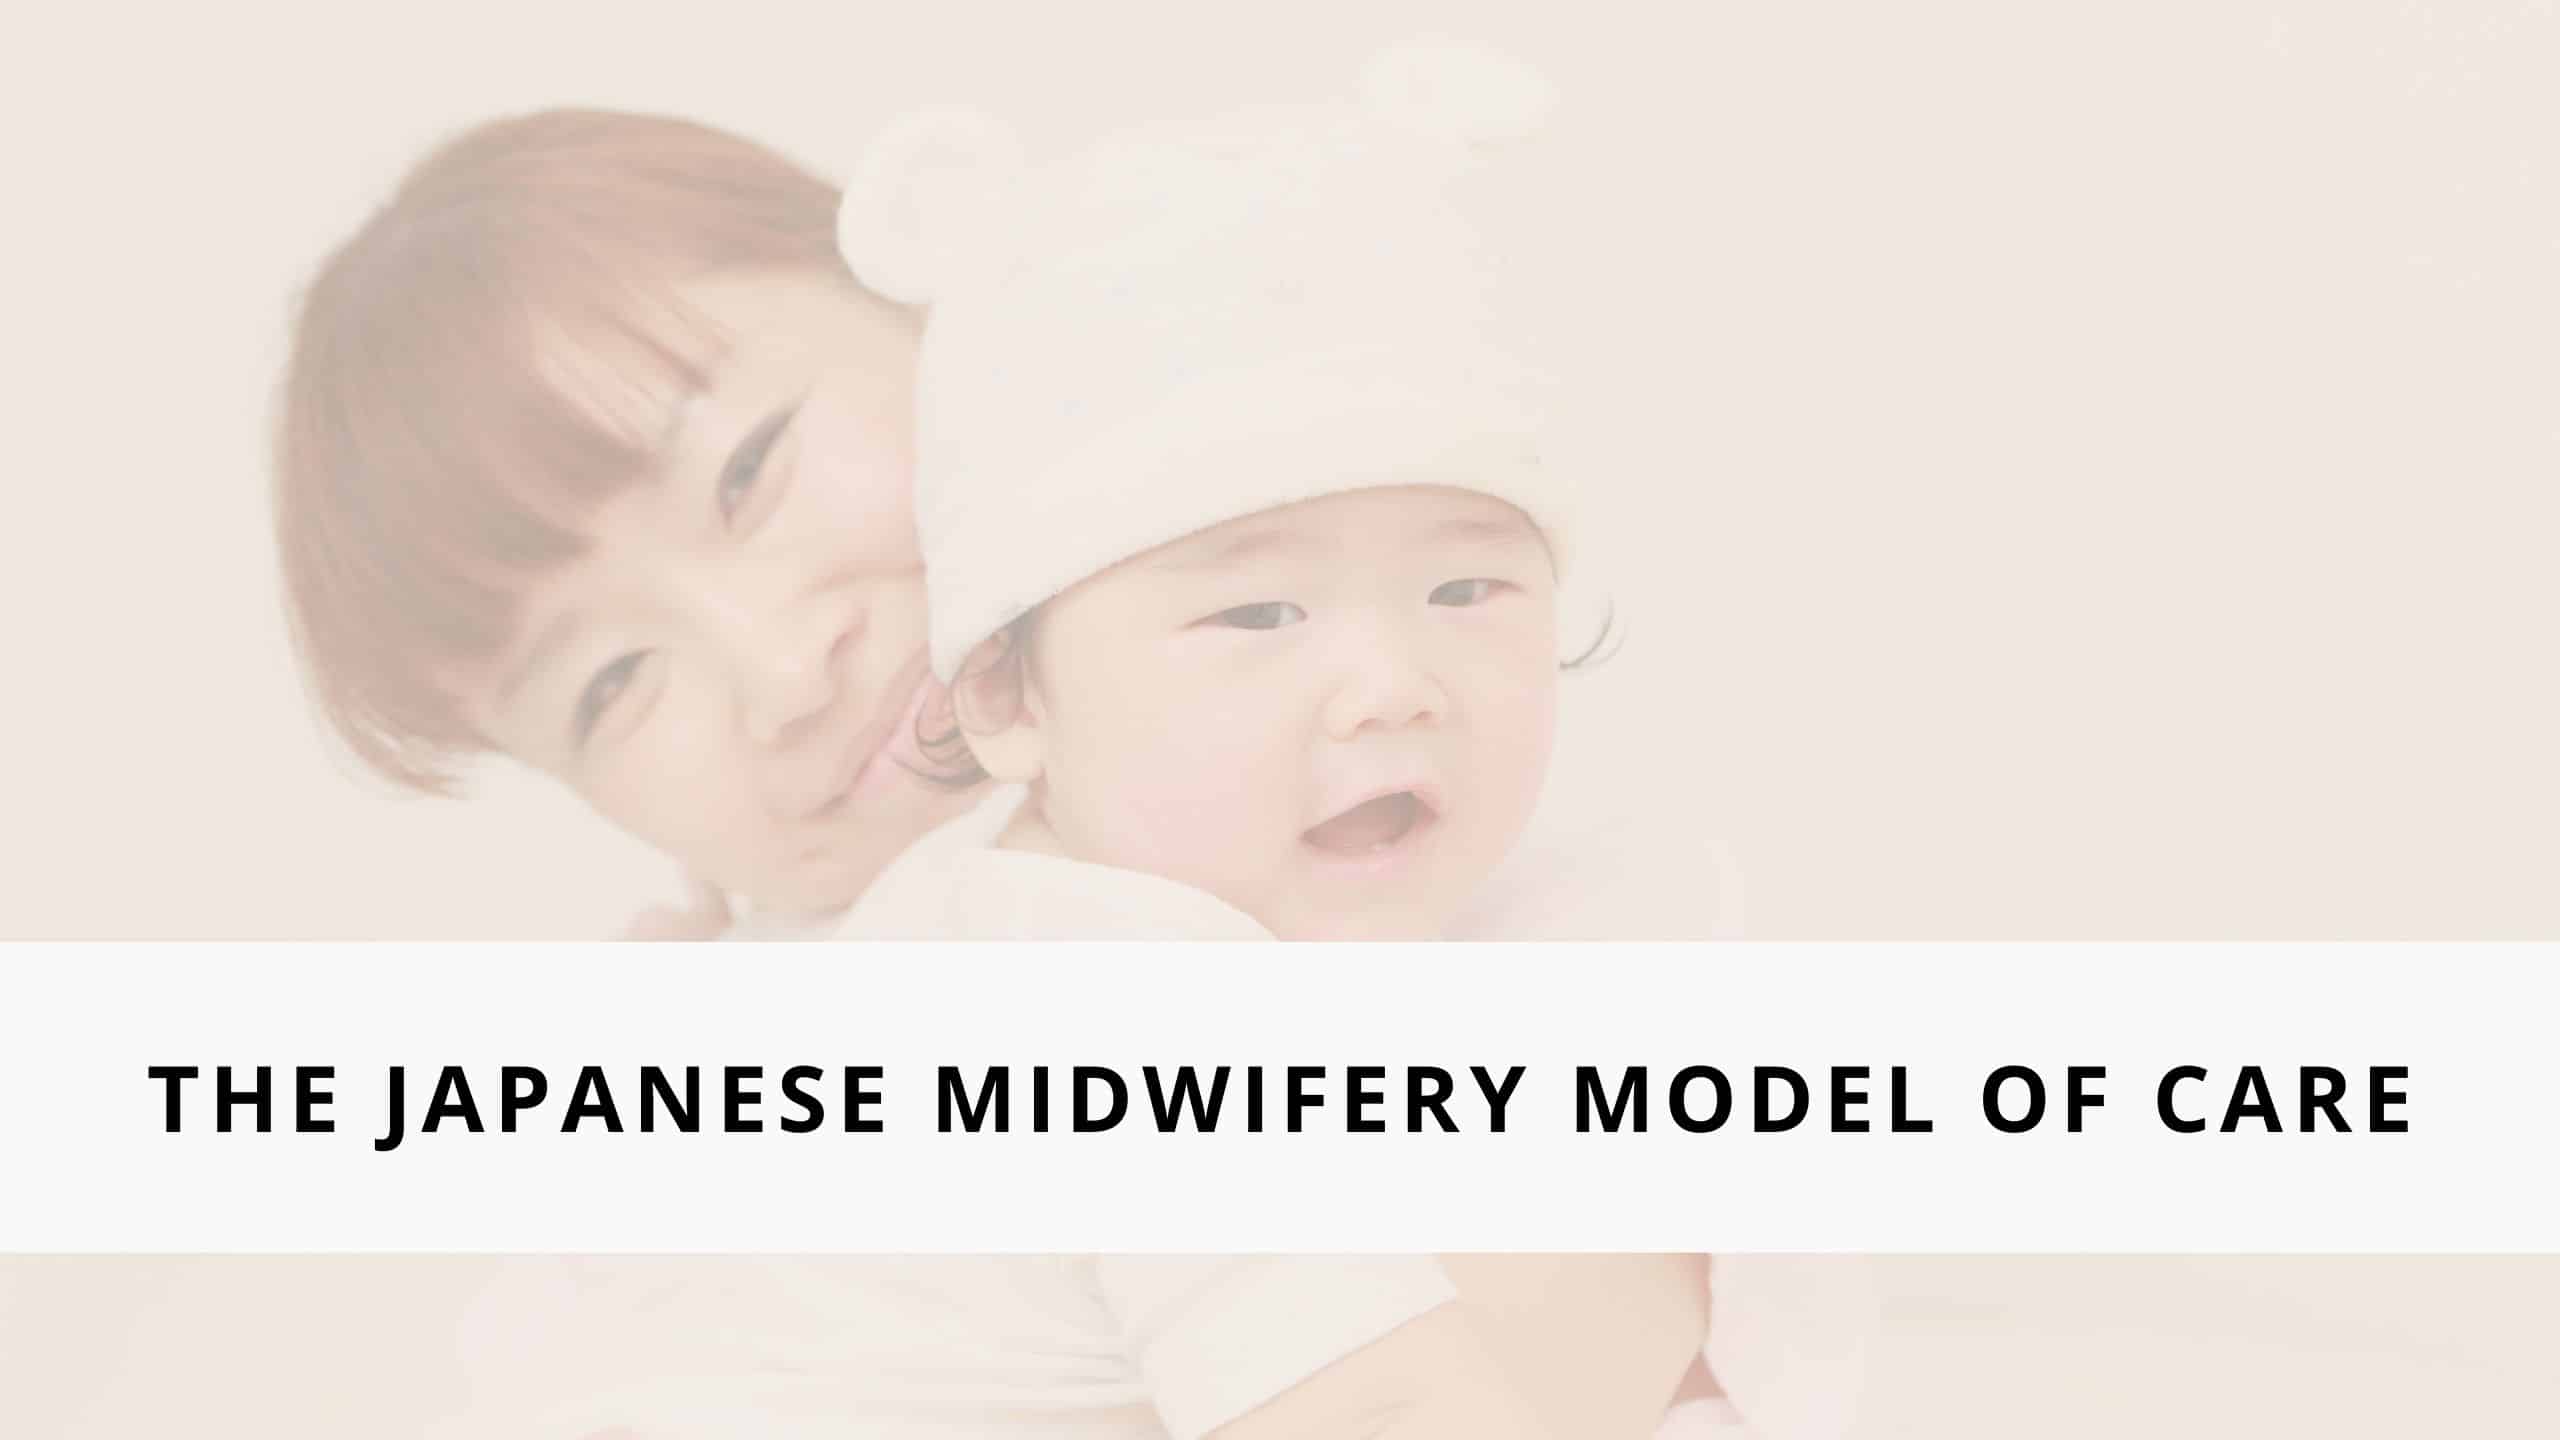 The Japanese Midwifery Model of Care